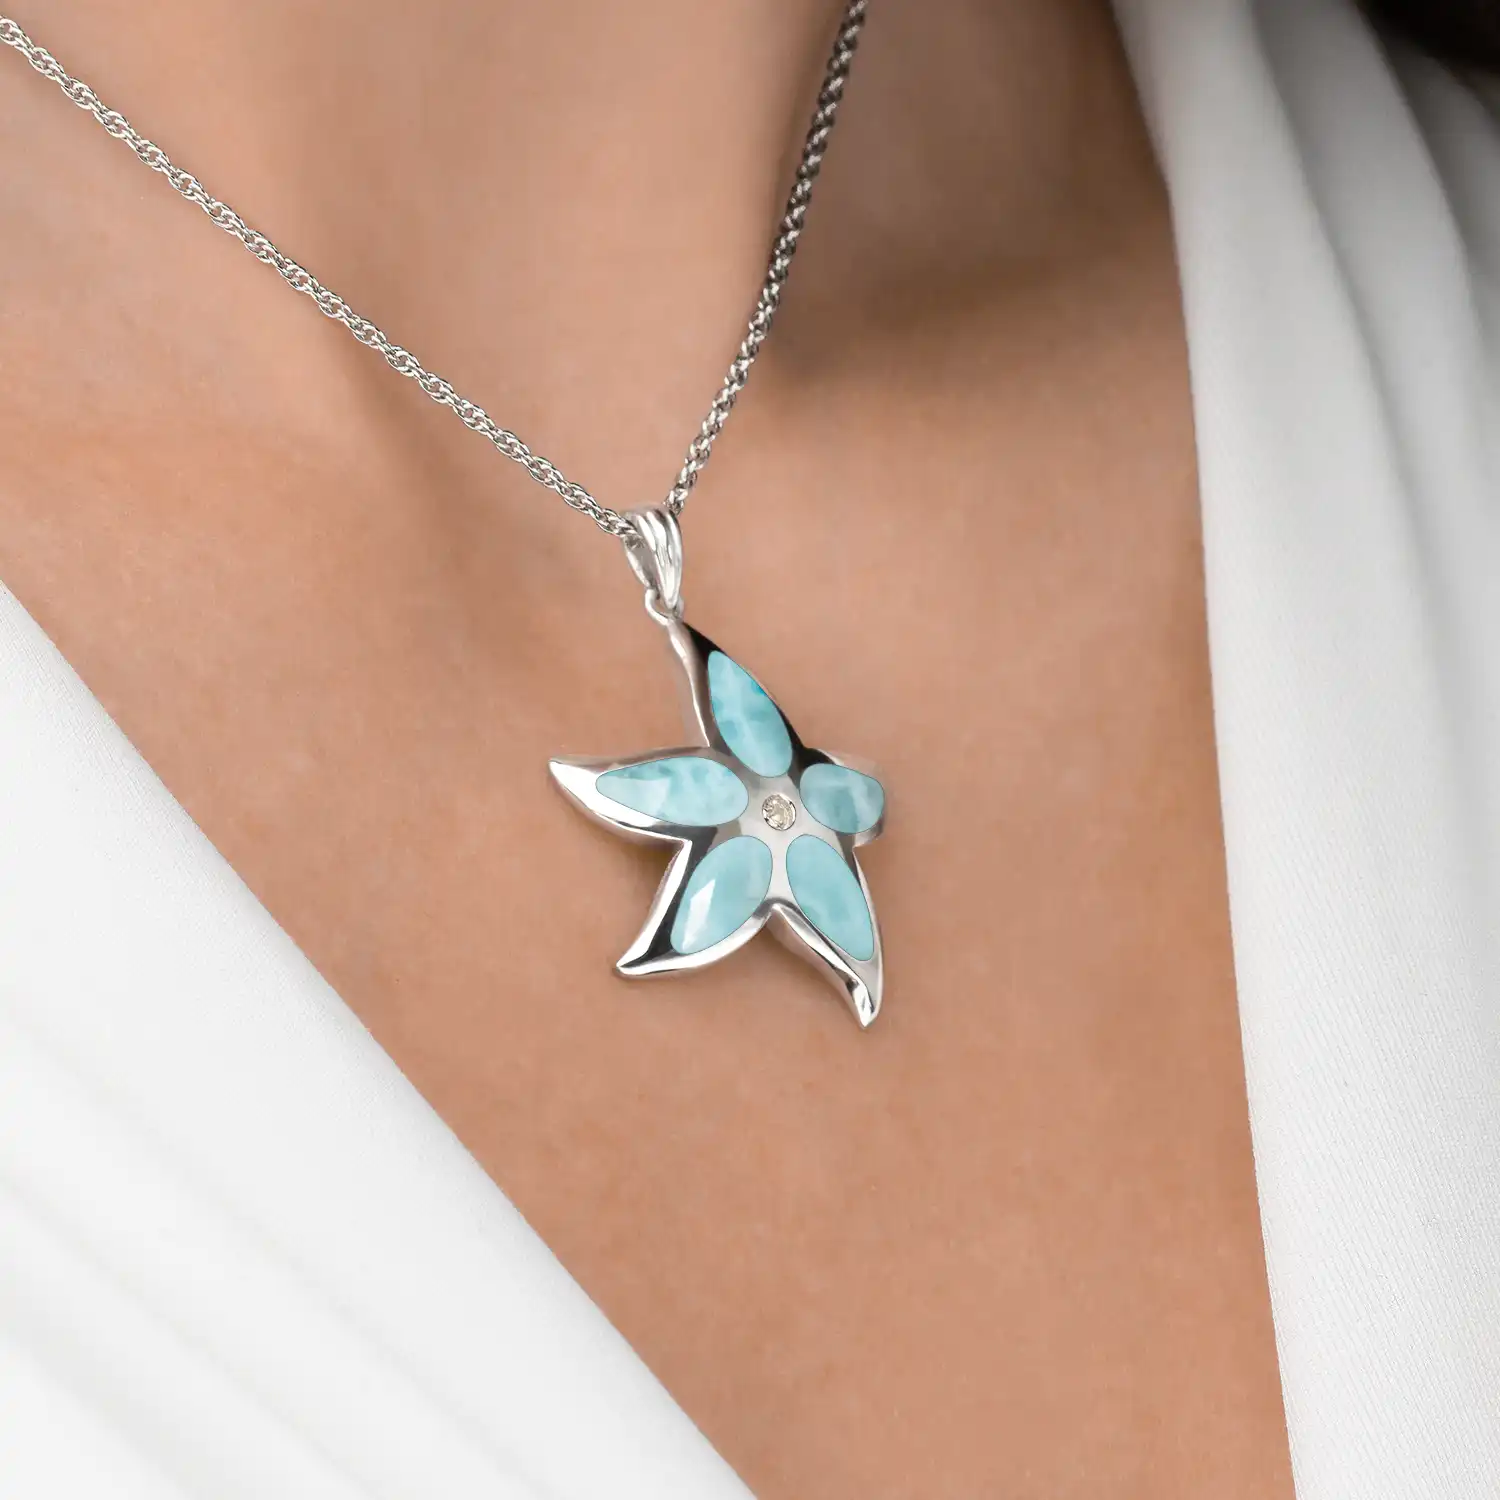 Starfish Necklace in sterling silver with blue stone